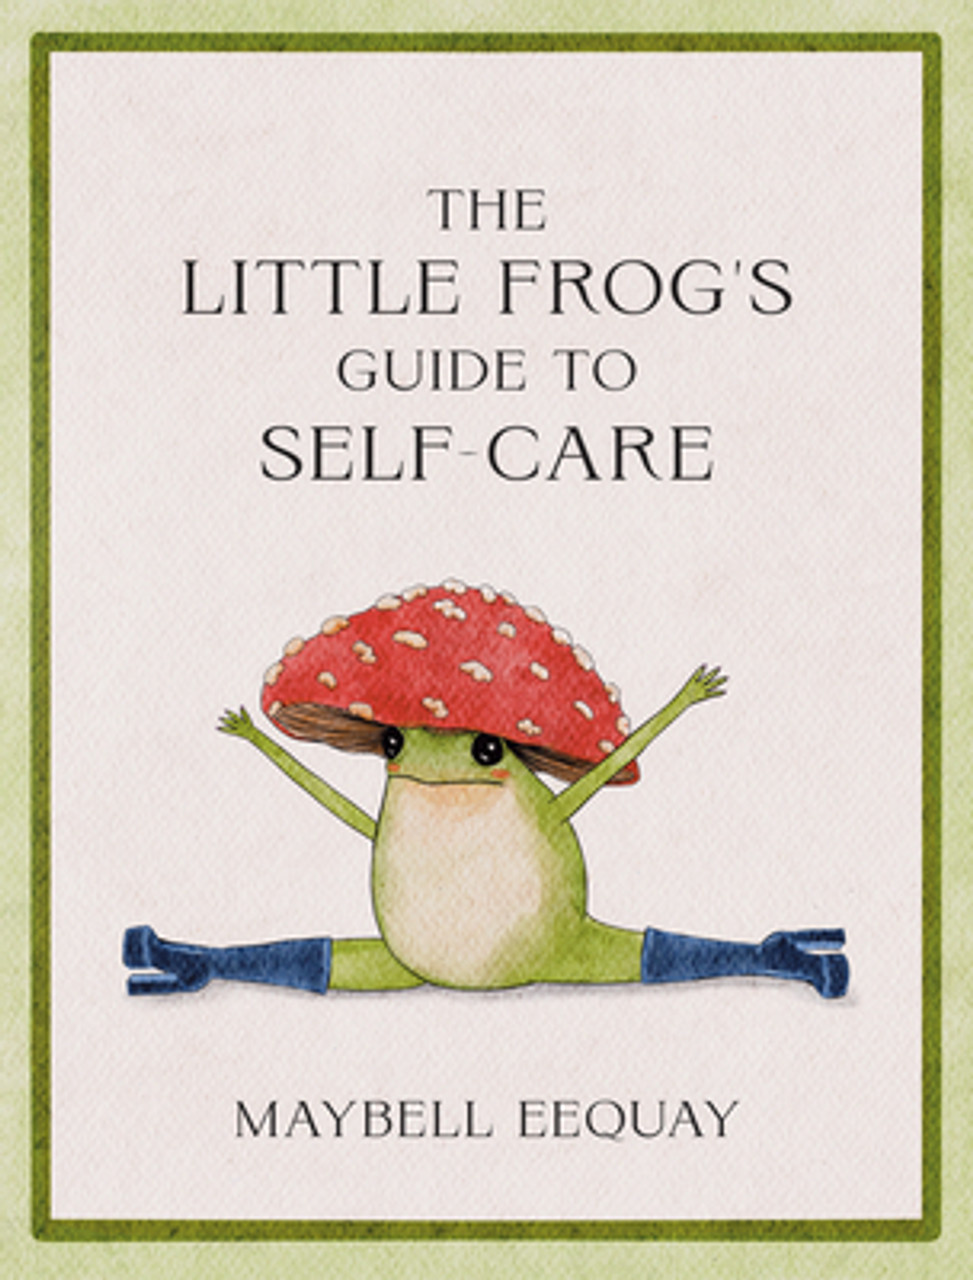 Maybell Eequay / The Little Frog's Guide to Self-Care (Hardback)